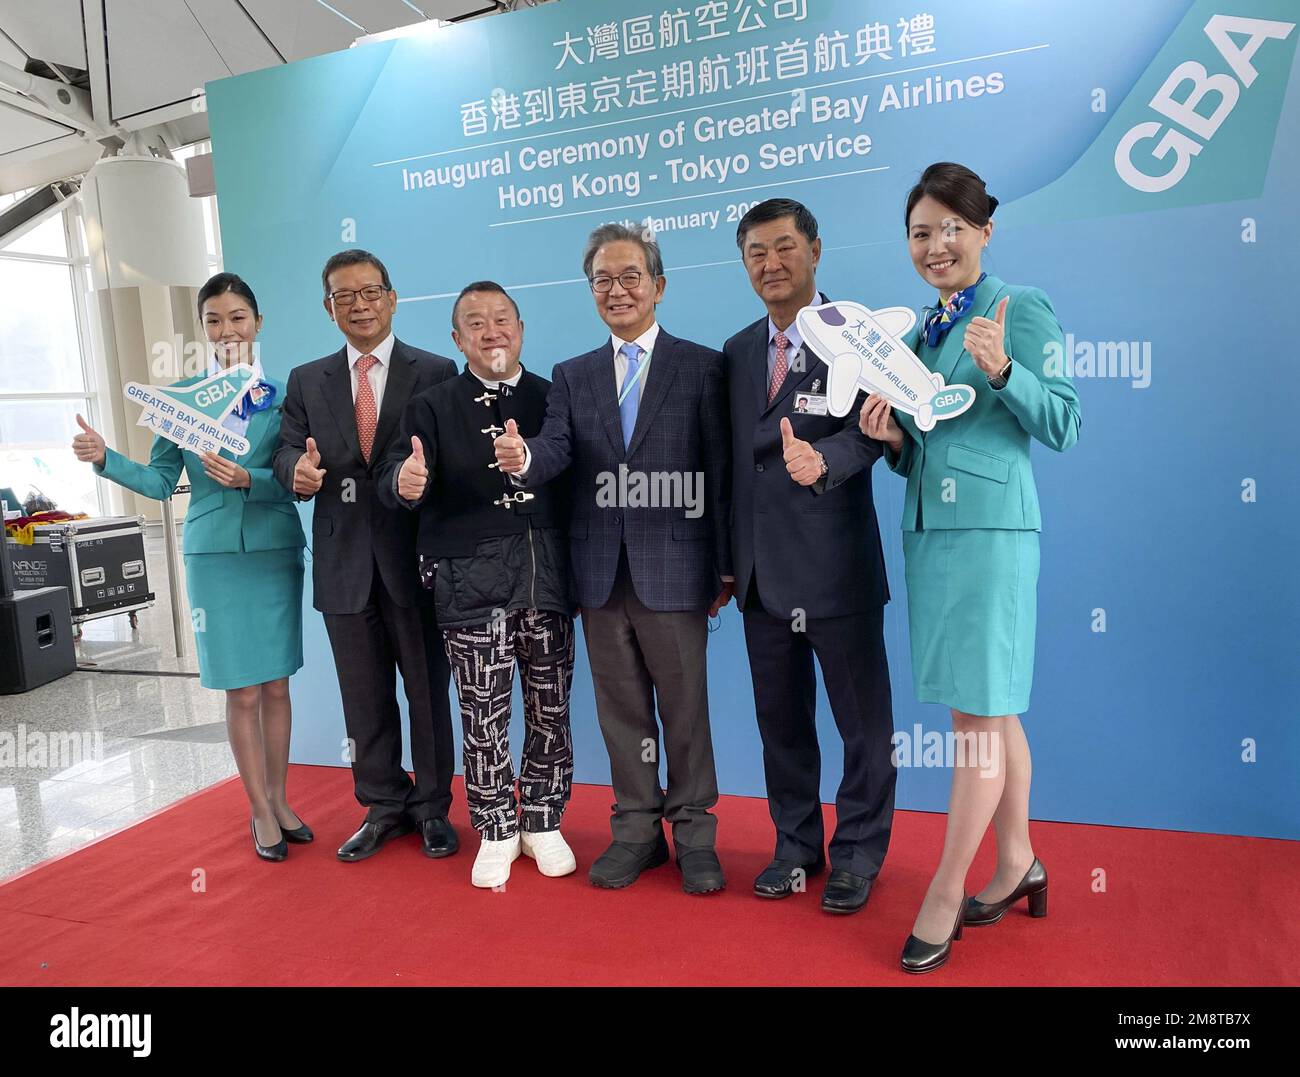 Hong Kong's Greater Bay Airlines launched regular service to Japan on Thursday, hoping to serve passengers aching to travel after years of Covid-19 restrictions. (From 2nd left) CEO Stanley Hui Hon-chung, actor Eric Tsang Chi-wai , chairman of the Board of Airport Authority Jack So Chak-kwong, chairman Bill Wong Cho-bau. 12JAN23 SCMP/ Cannix Yau Stock Photo